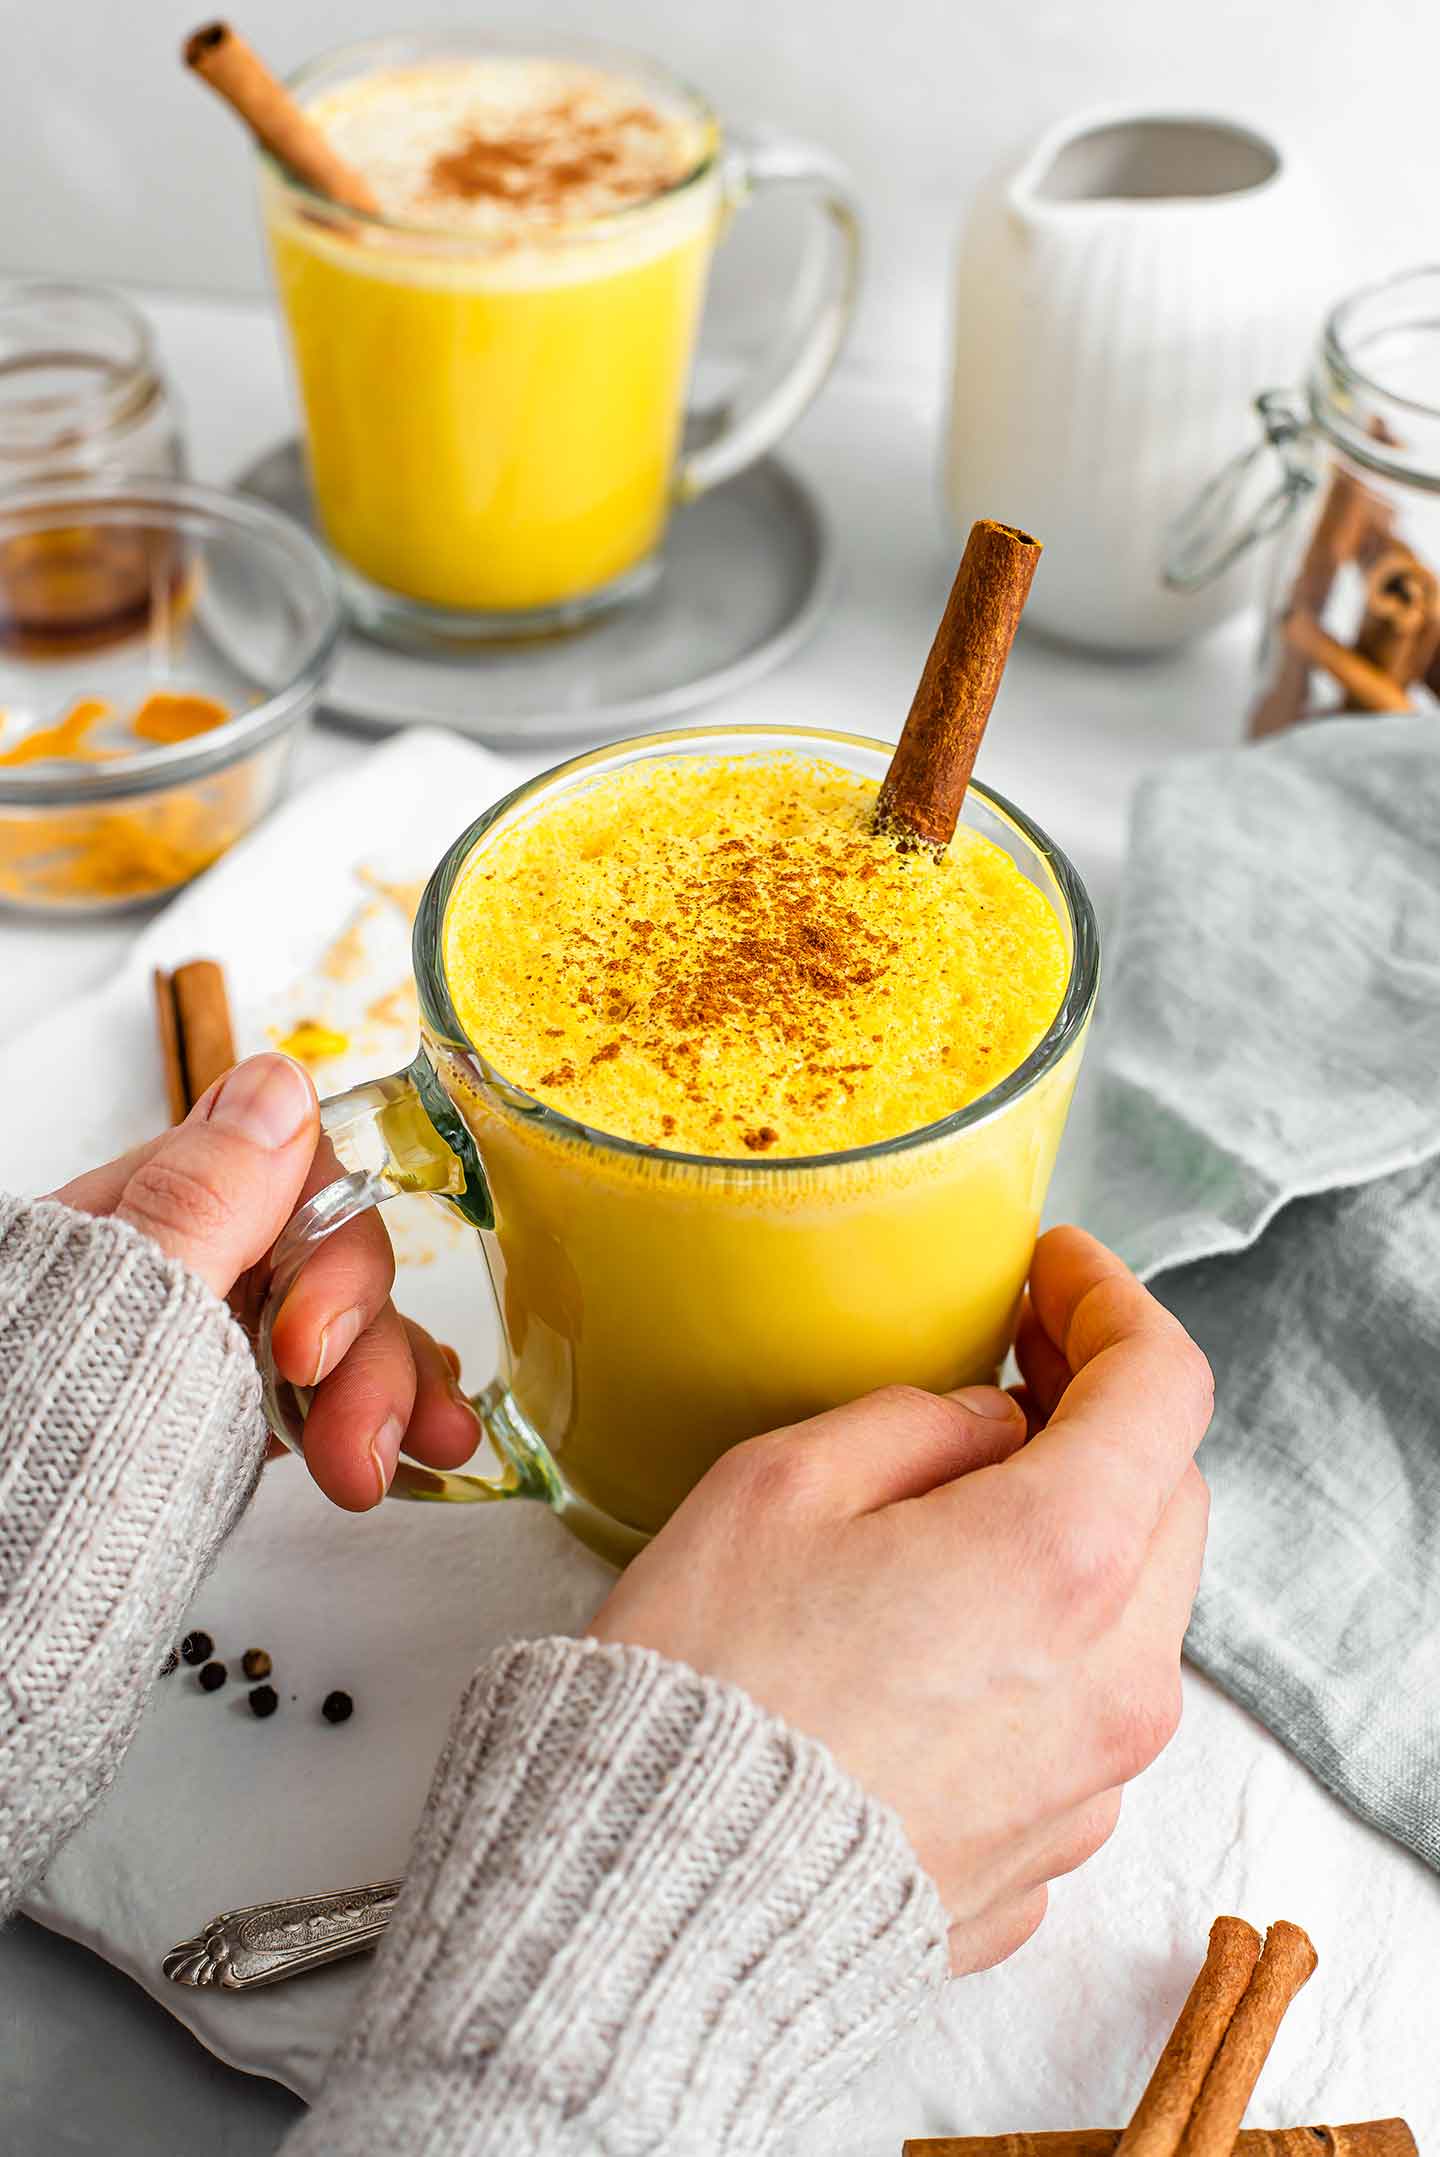 Two hands with a cozy sweater visible, rest on the sides of the clear mug. The latte is vibrant yellow with a cinnamon stick protruding. Another latte and ingredients are in the background.